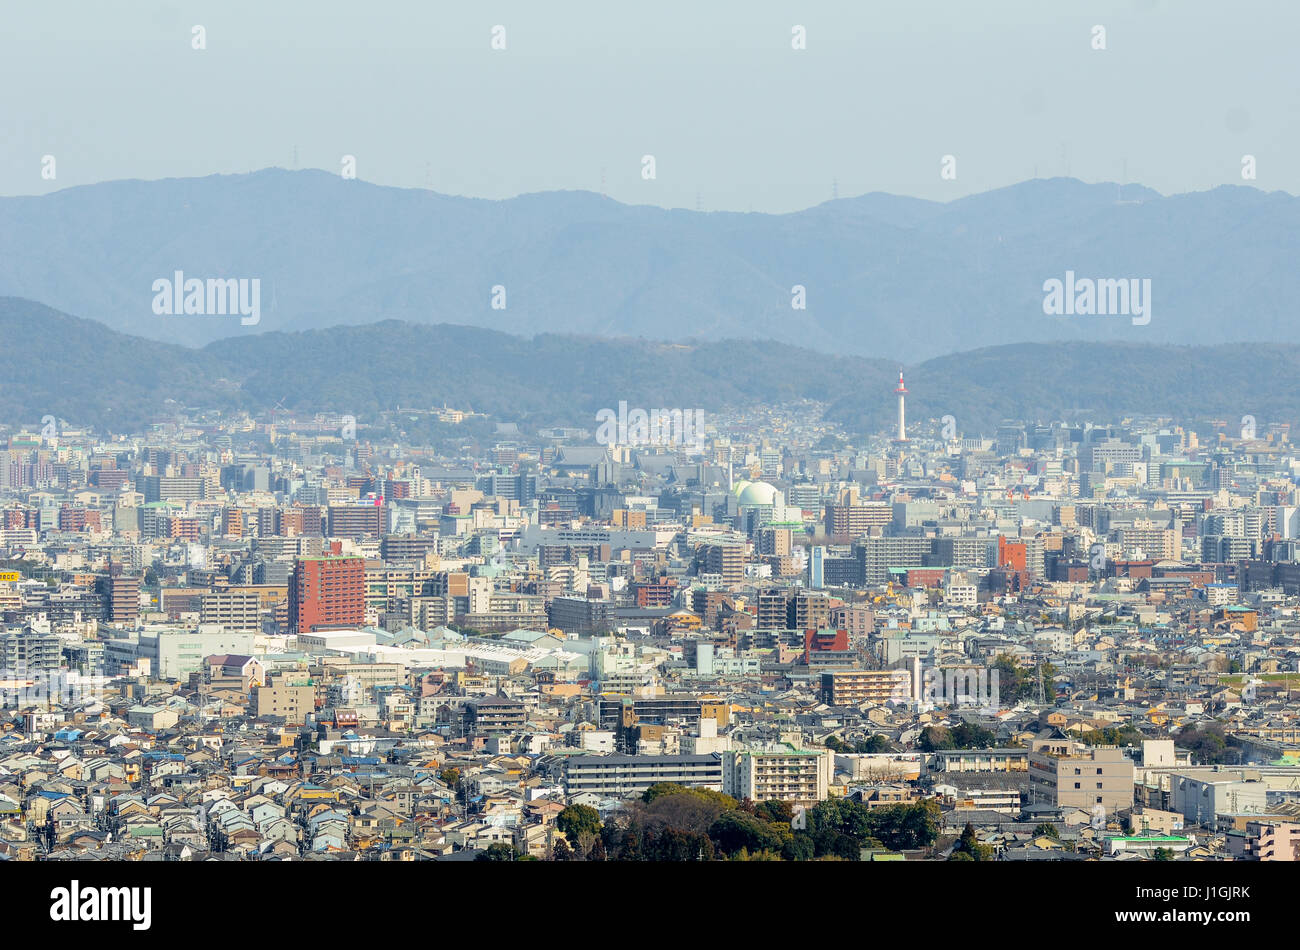 A view of the city of Kyoto in Japan, with Kyoto Tower viewable towards the top right of the image. Stock Photo